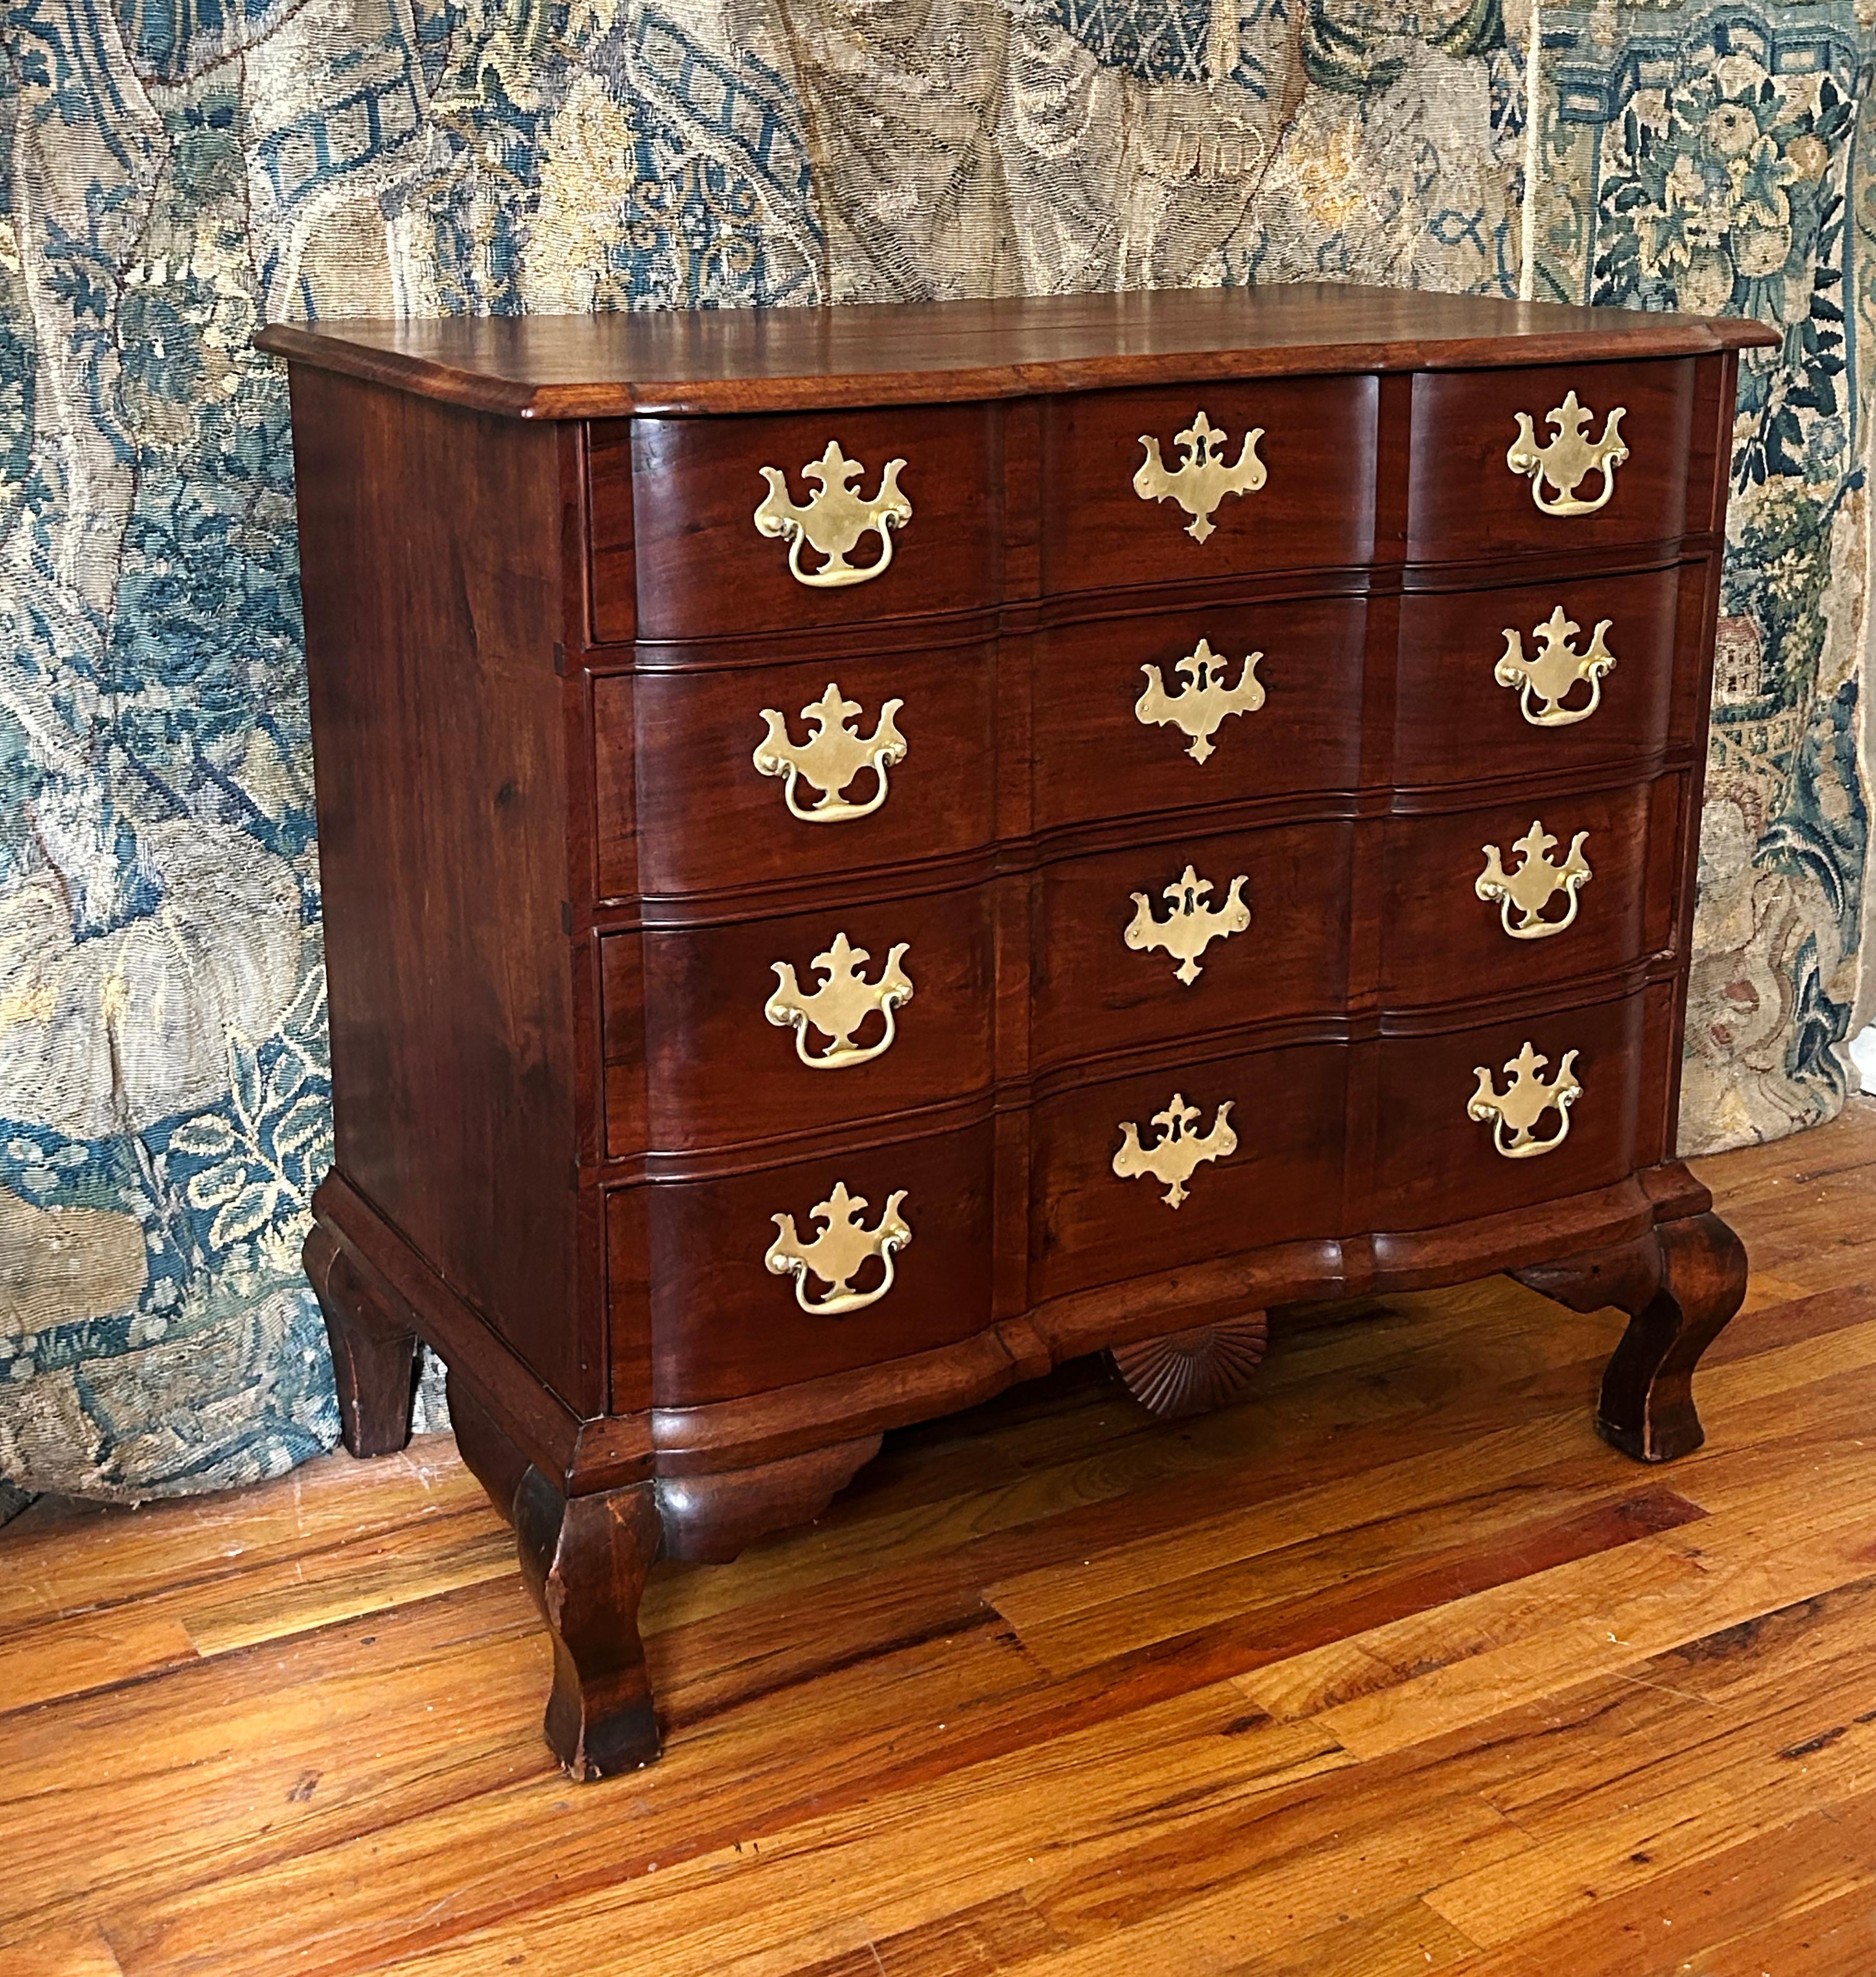 A diminutive block-front colonial American chest from the third quarter of the 18th century.  Lovely mahogany timber and patina, the chest exhibits a number of characteristics of the workshop of George Bright (1726-1805).  Four graduated drawers sit